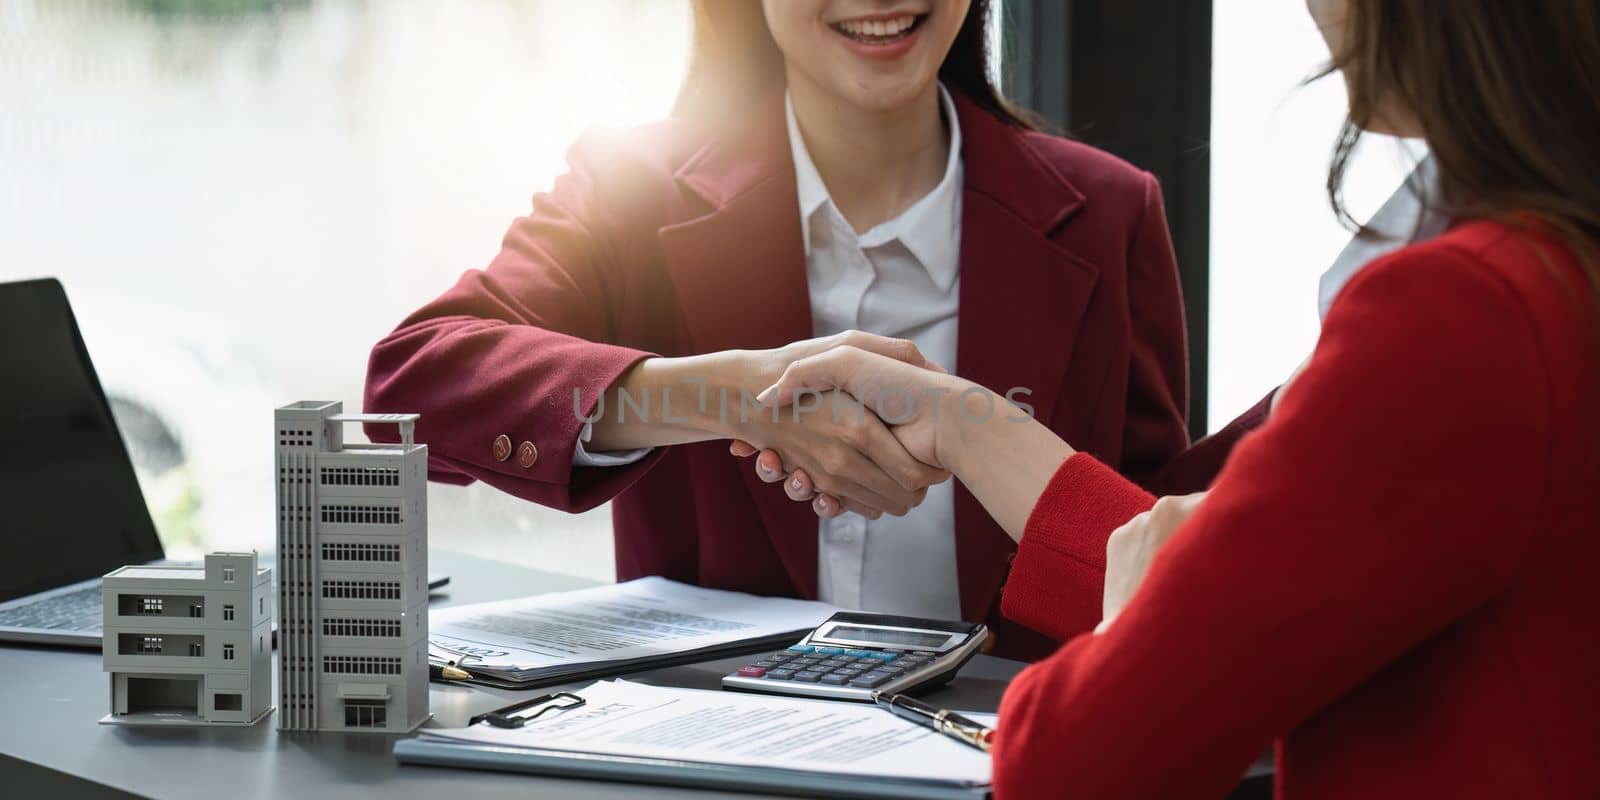 Real estate agents shake hands after the signing of the contract agreement. Business people shake hands. Real estate concept by itchaznong